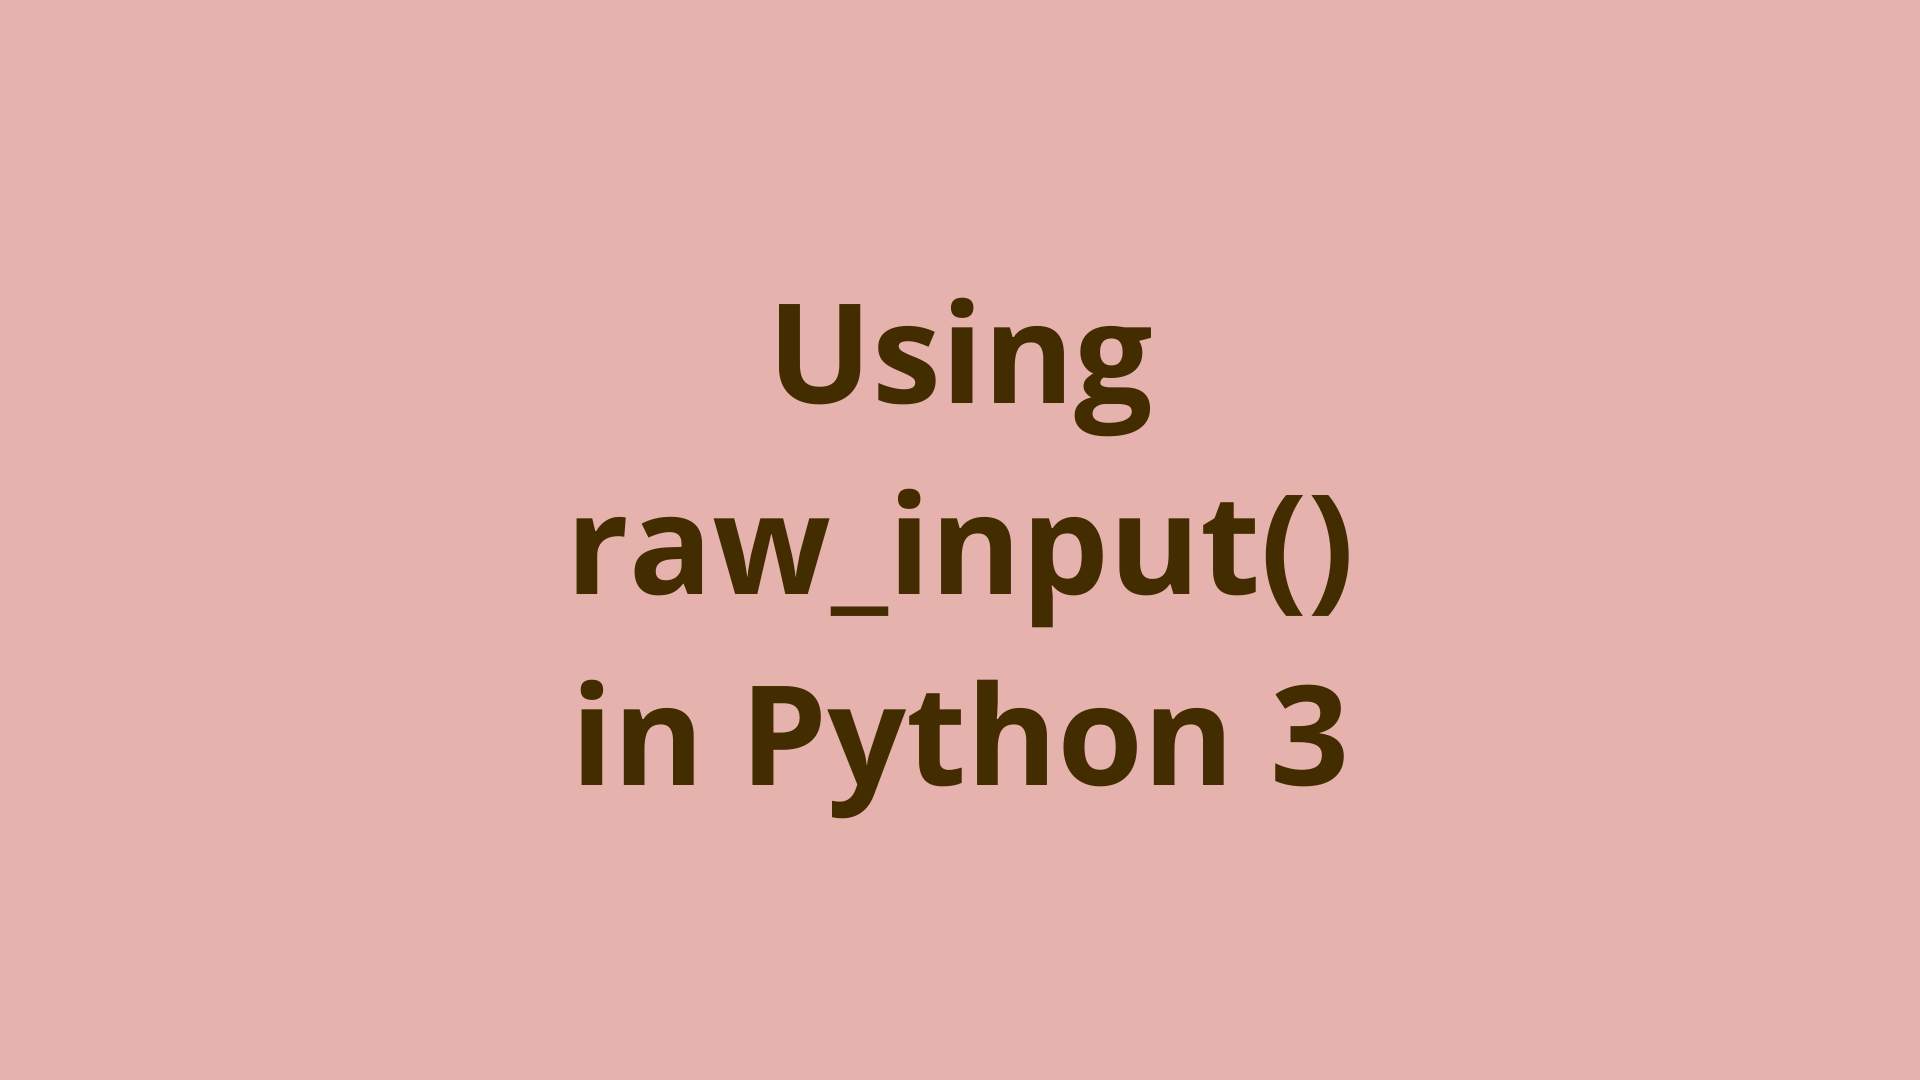 Image of Using raw_input() in Python 3